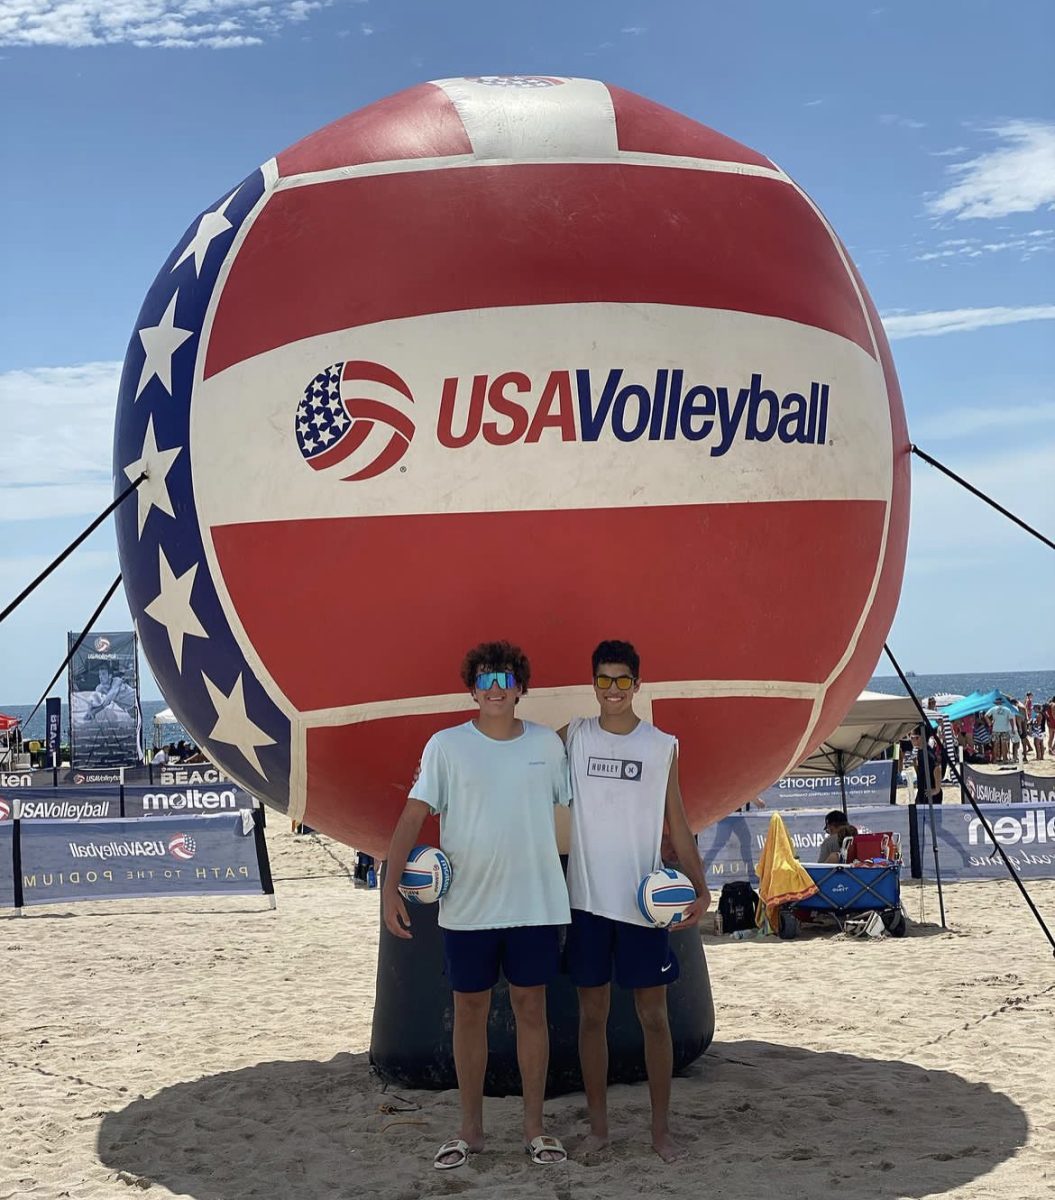 National+Duo+Juniors+Charlie+Gordy+and+Maddox+Canham+pose+at+the+USA+Volleyball+Championship%2C+after+a+top+10+national+finish.